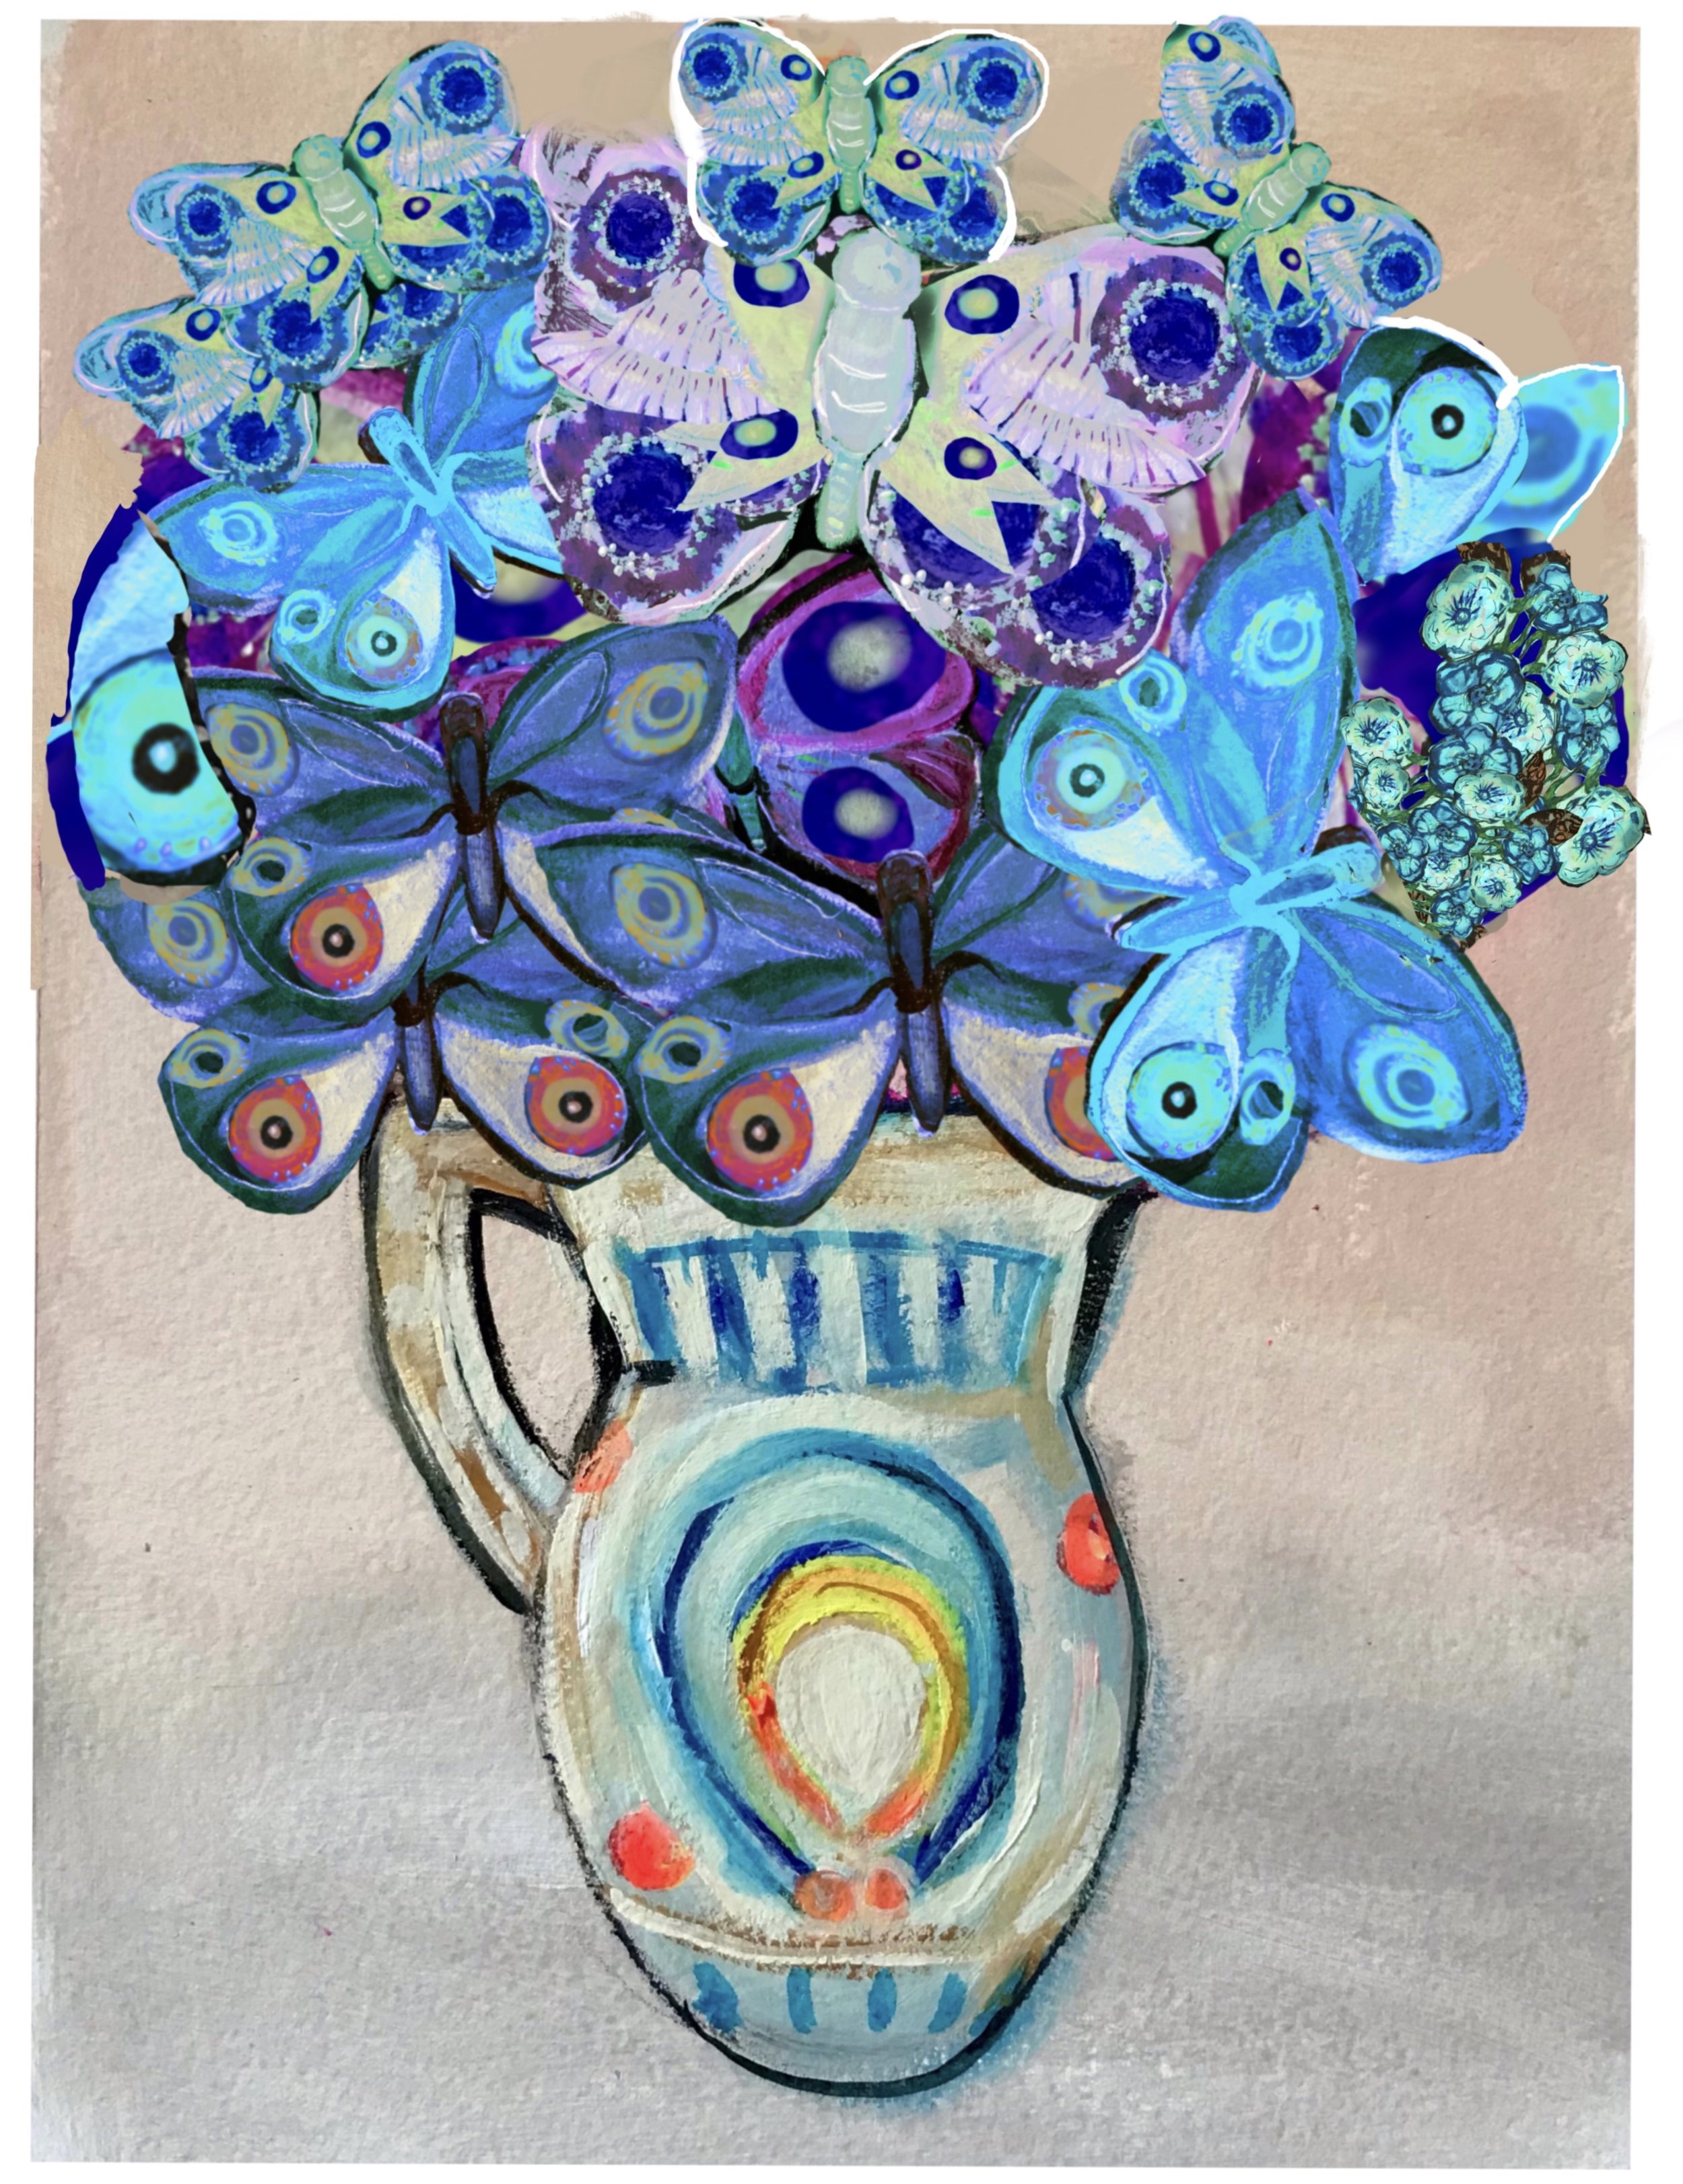  Butterfly Bouquet 9 x 12 inches, Original paintings in a digital collage  $300.  a composition of butterflies and flowers 